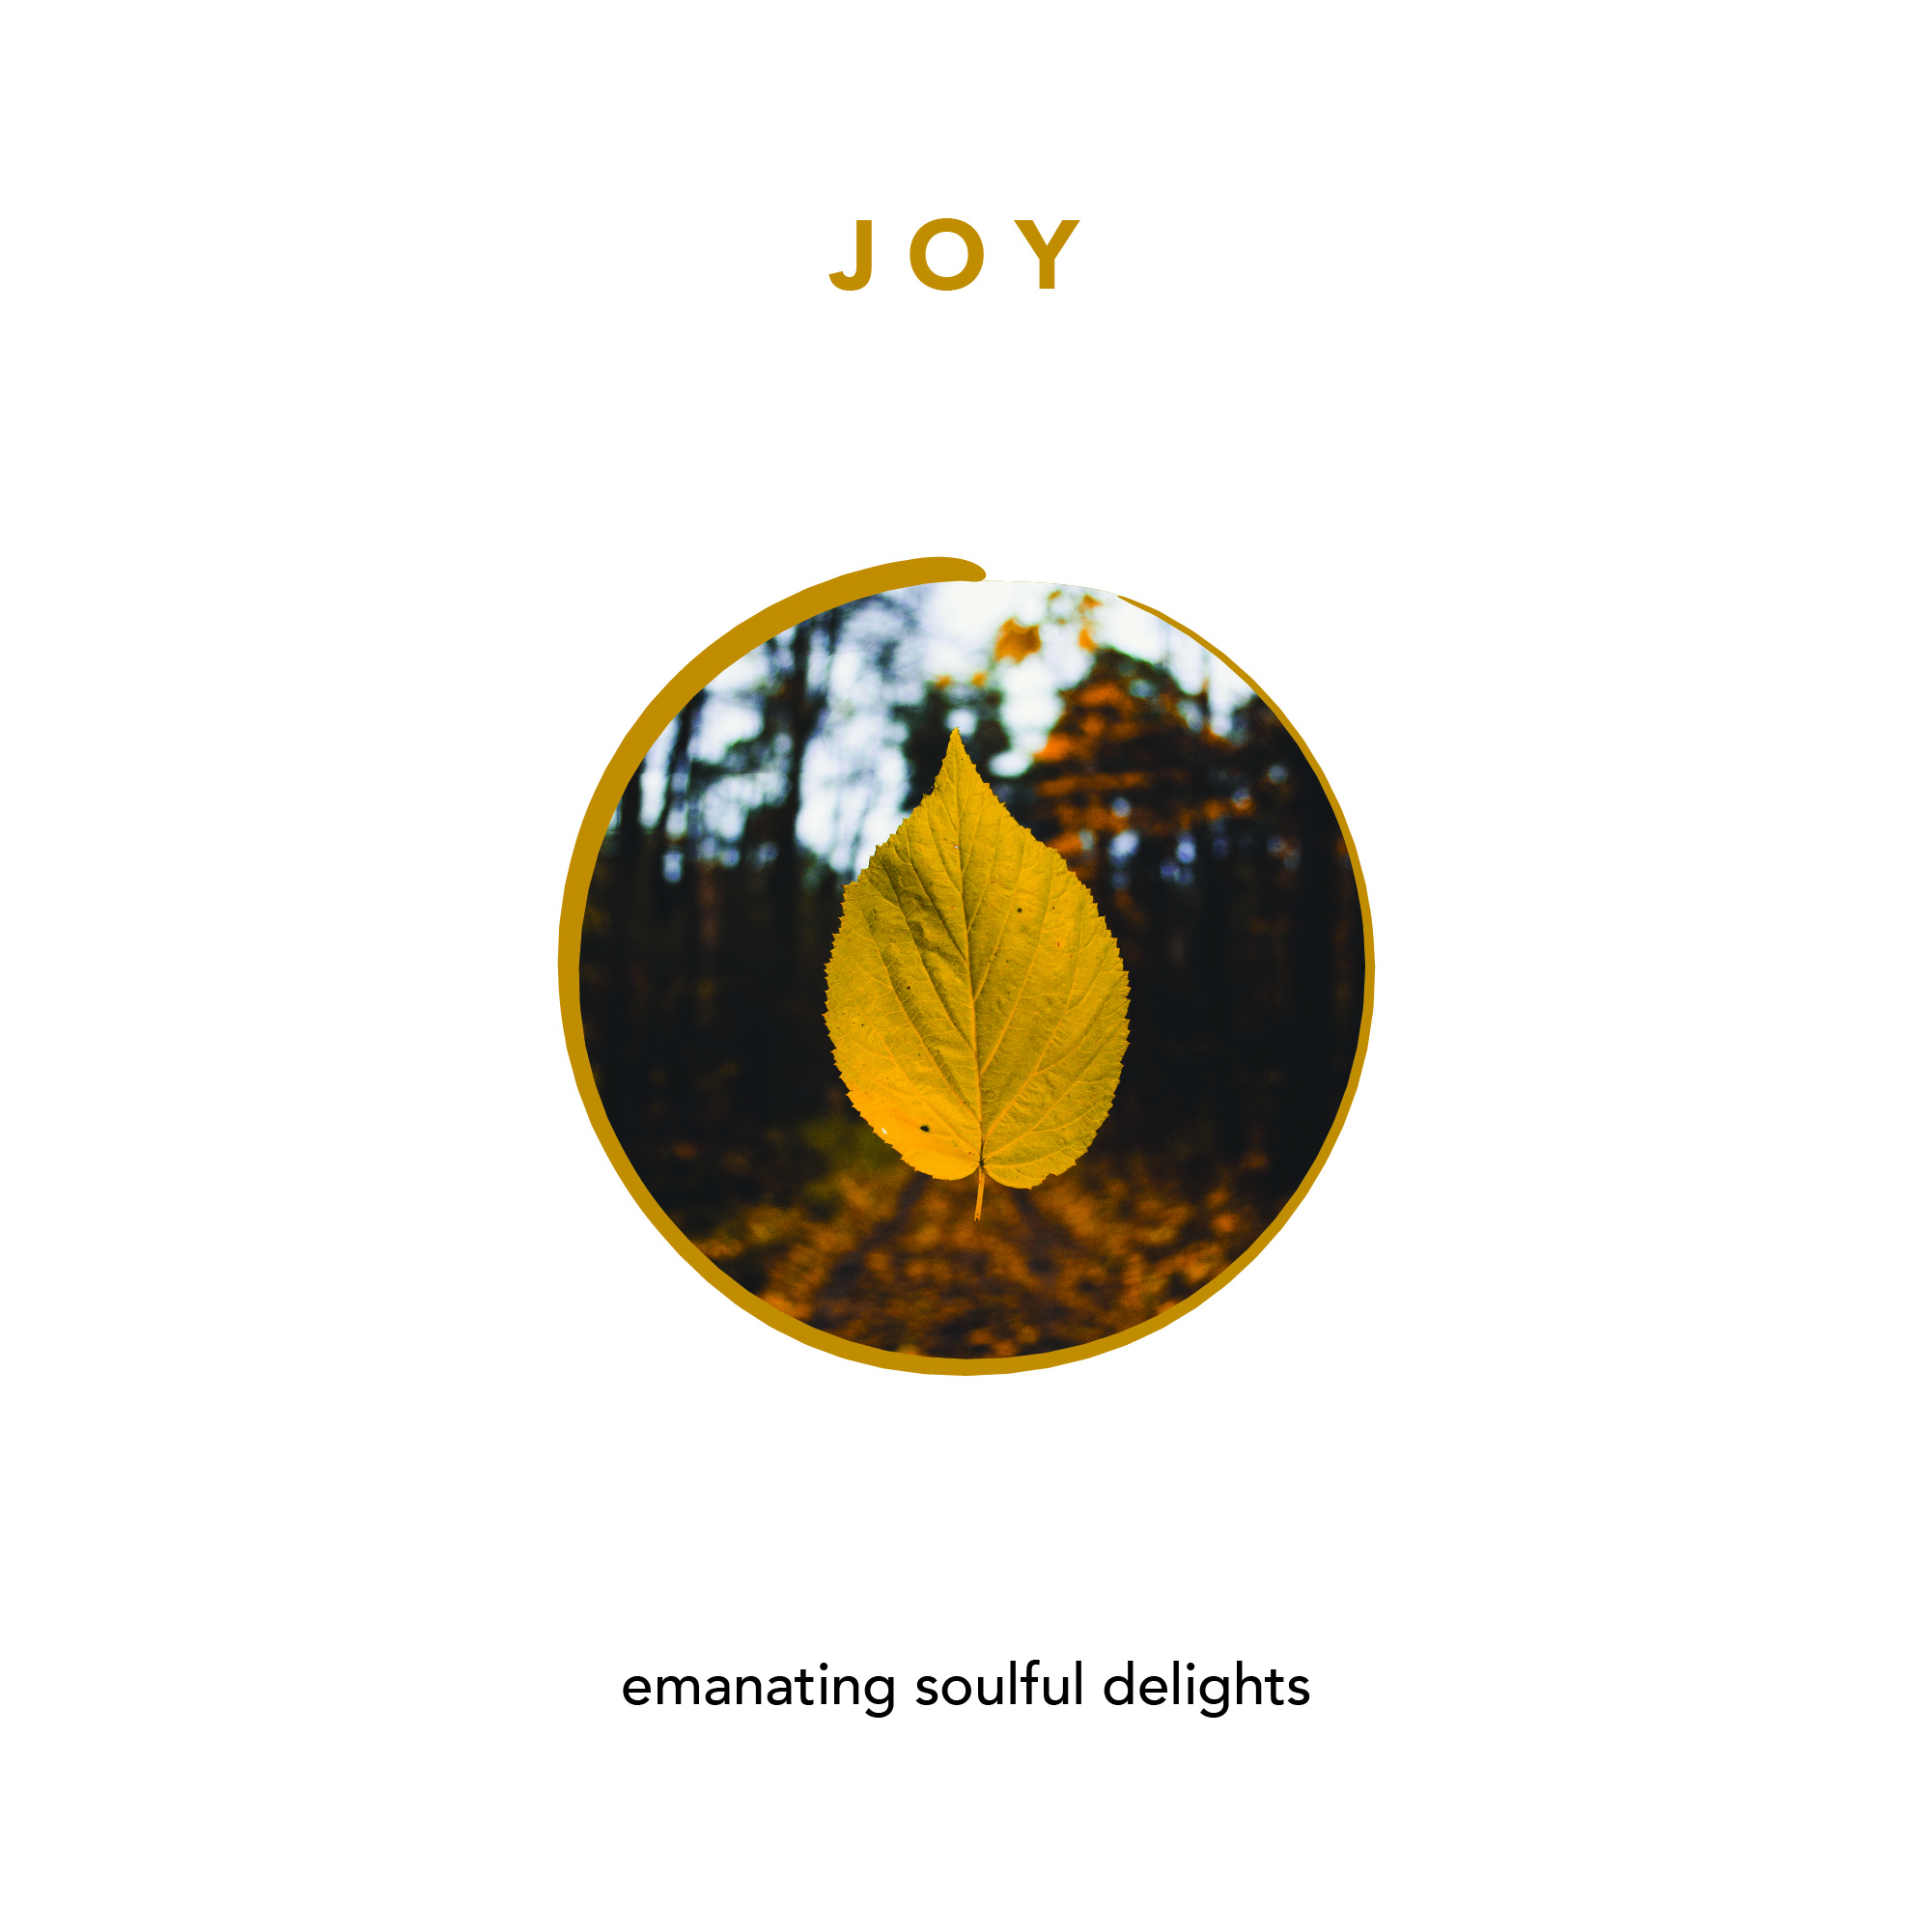 😄 JOY - creating from the soul with surrender, curiosity, and love